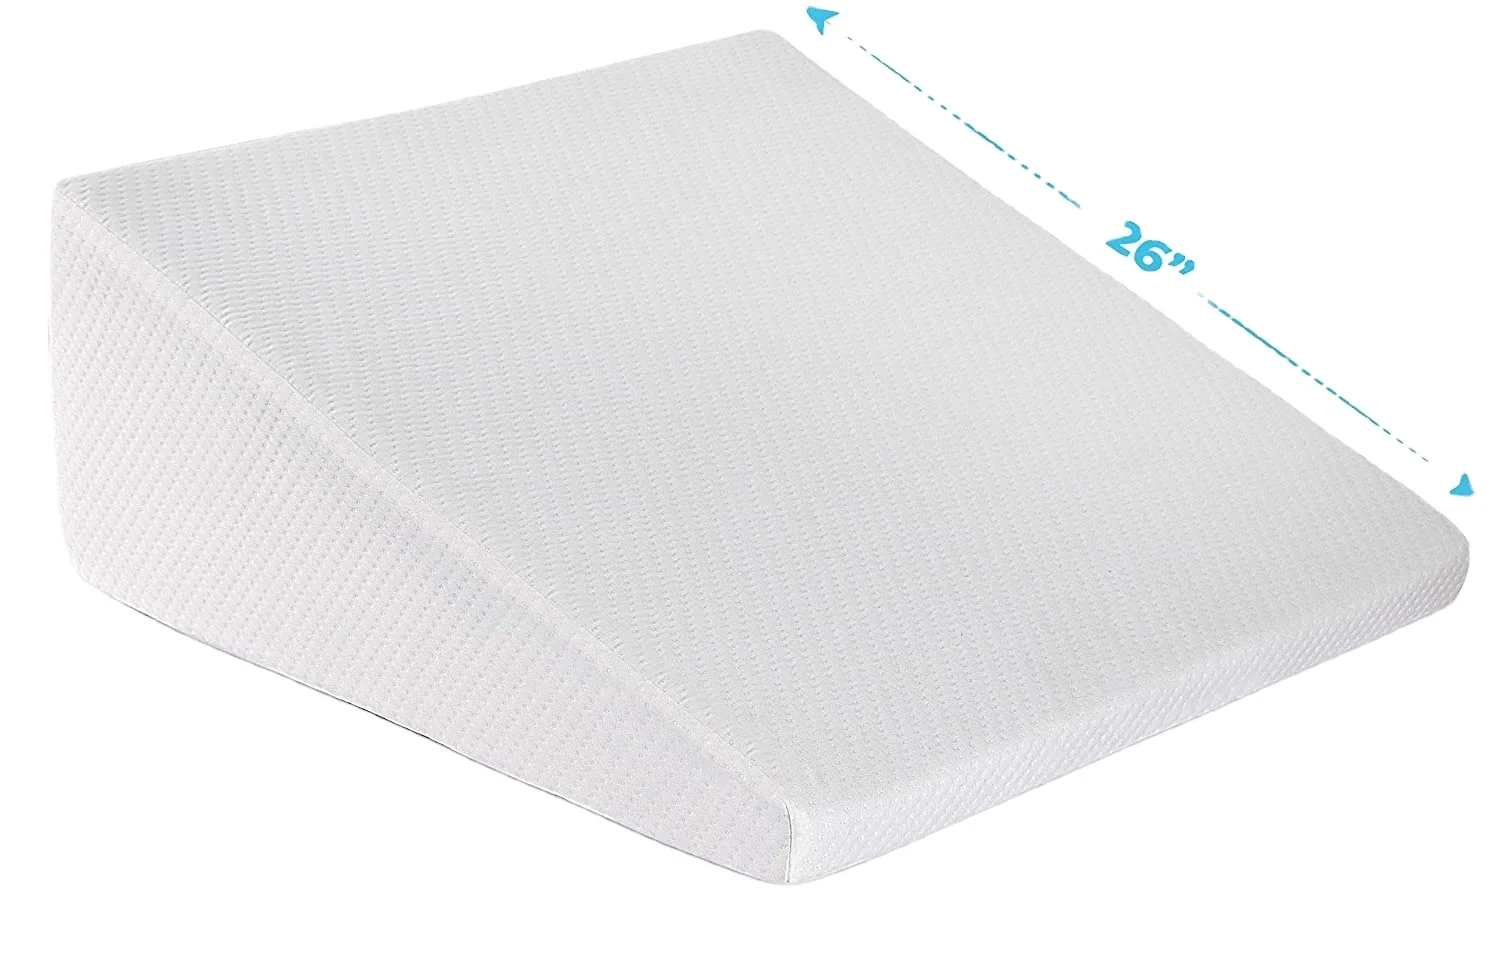 Source Wholesale Bed Wedge Pillow with Memory Foam Top by Cushy Form - Best  for Sleeping on m.